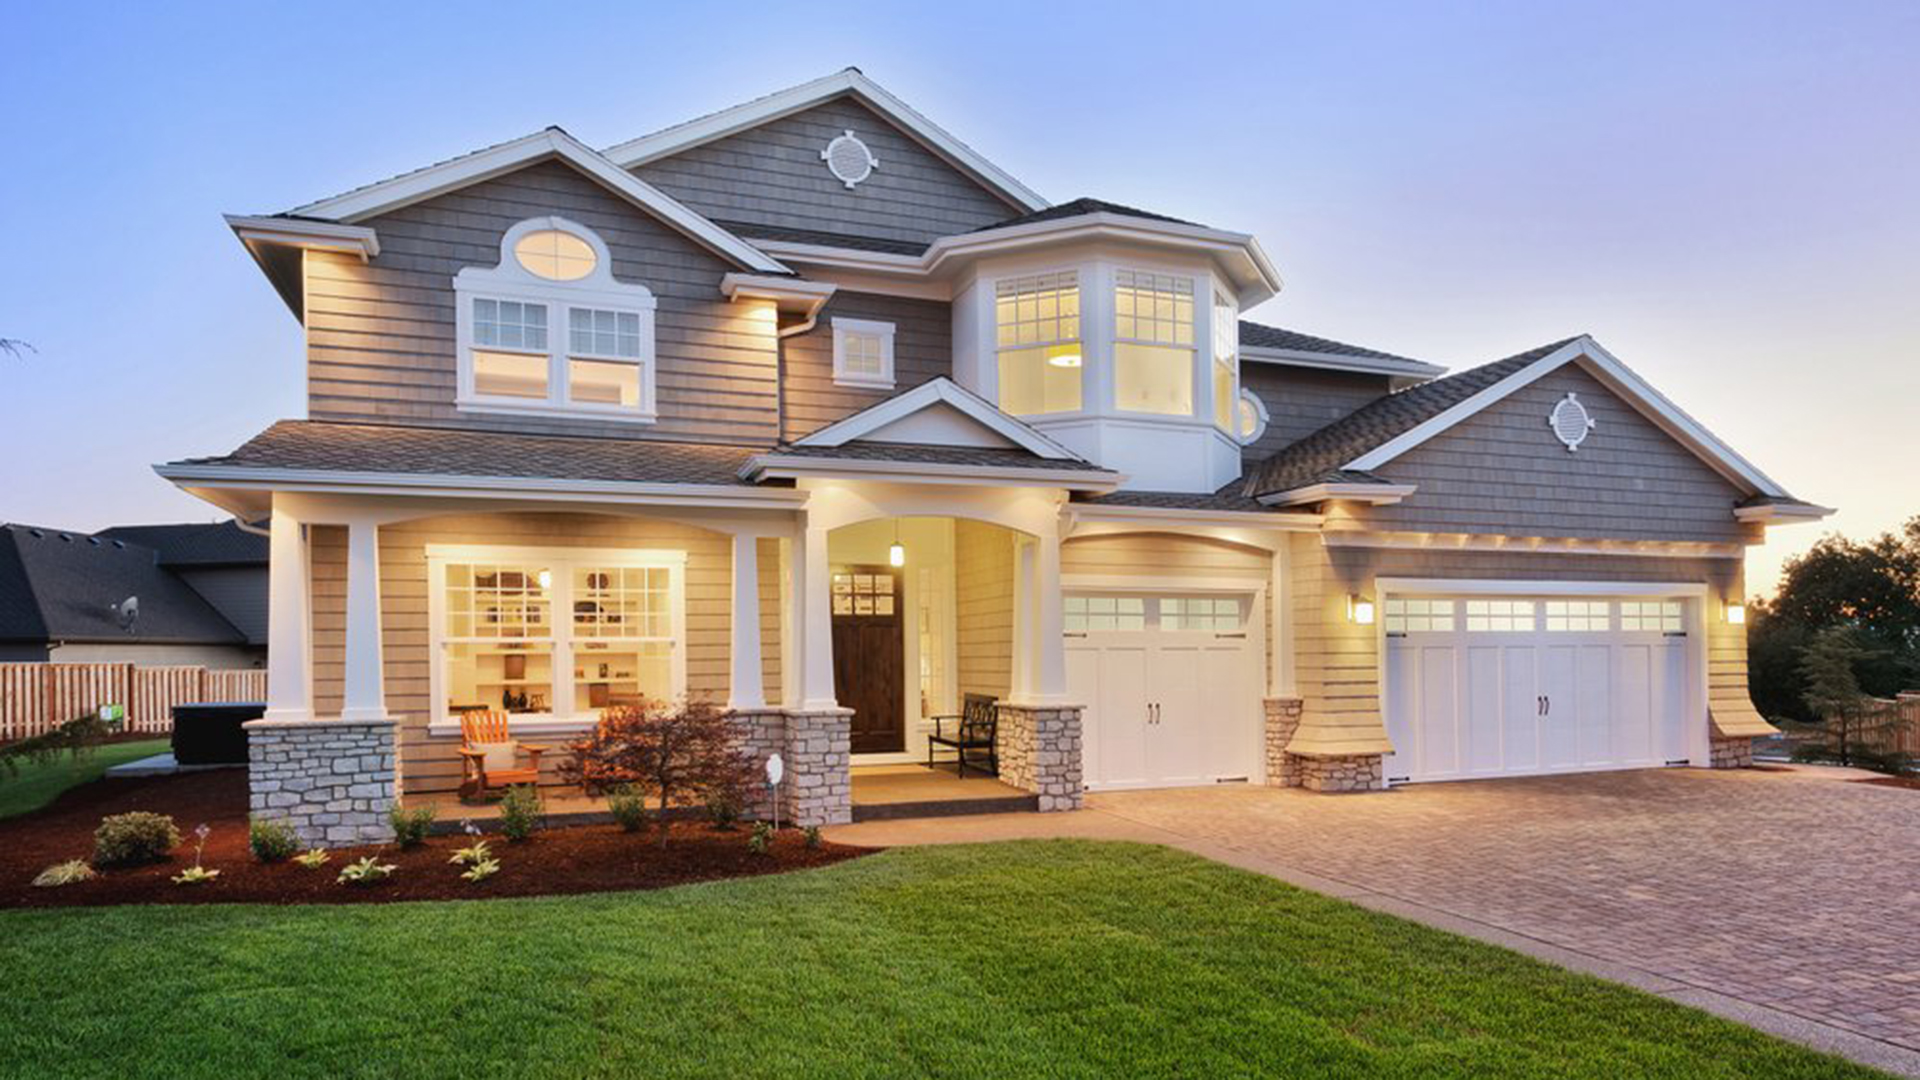 The Benefits of Energy-Efficient Home Improvements